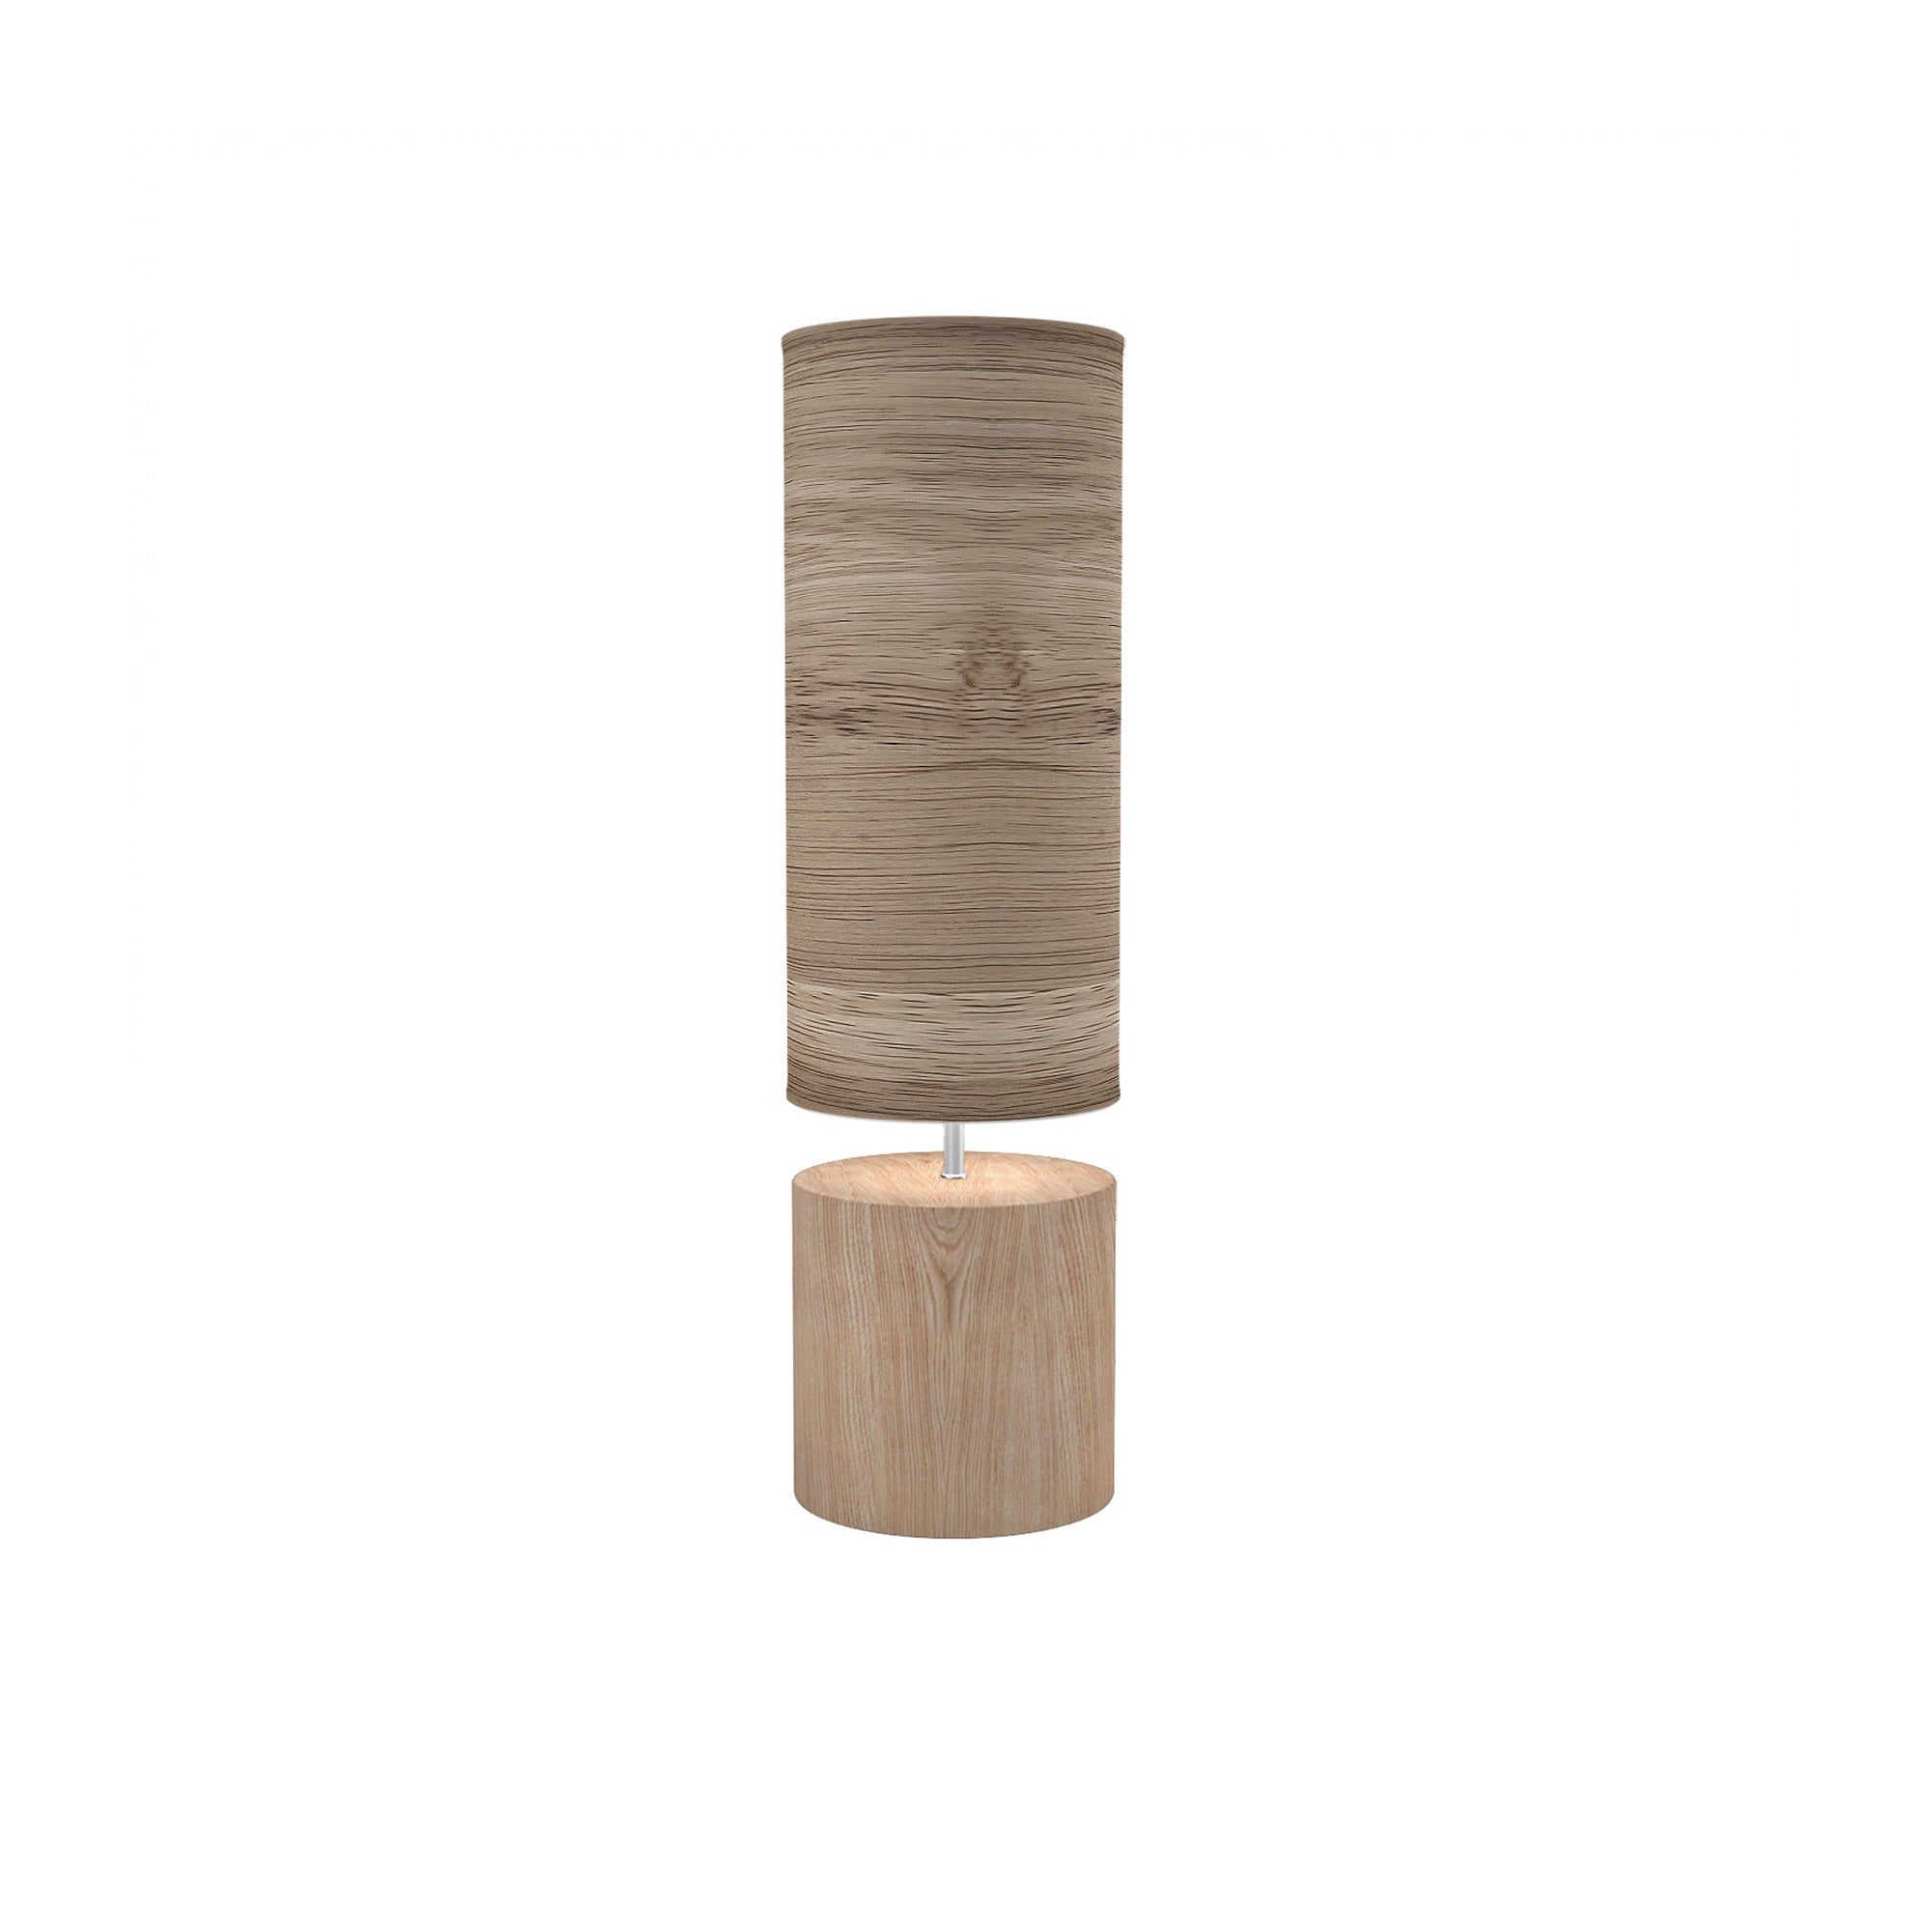 The Laurie Table Lamp from Seascape Fixtures with the natural base with photo veneer shade in natural color.